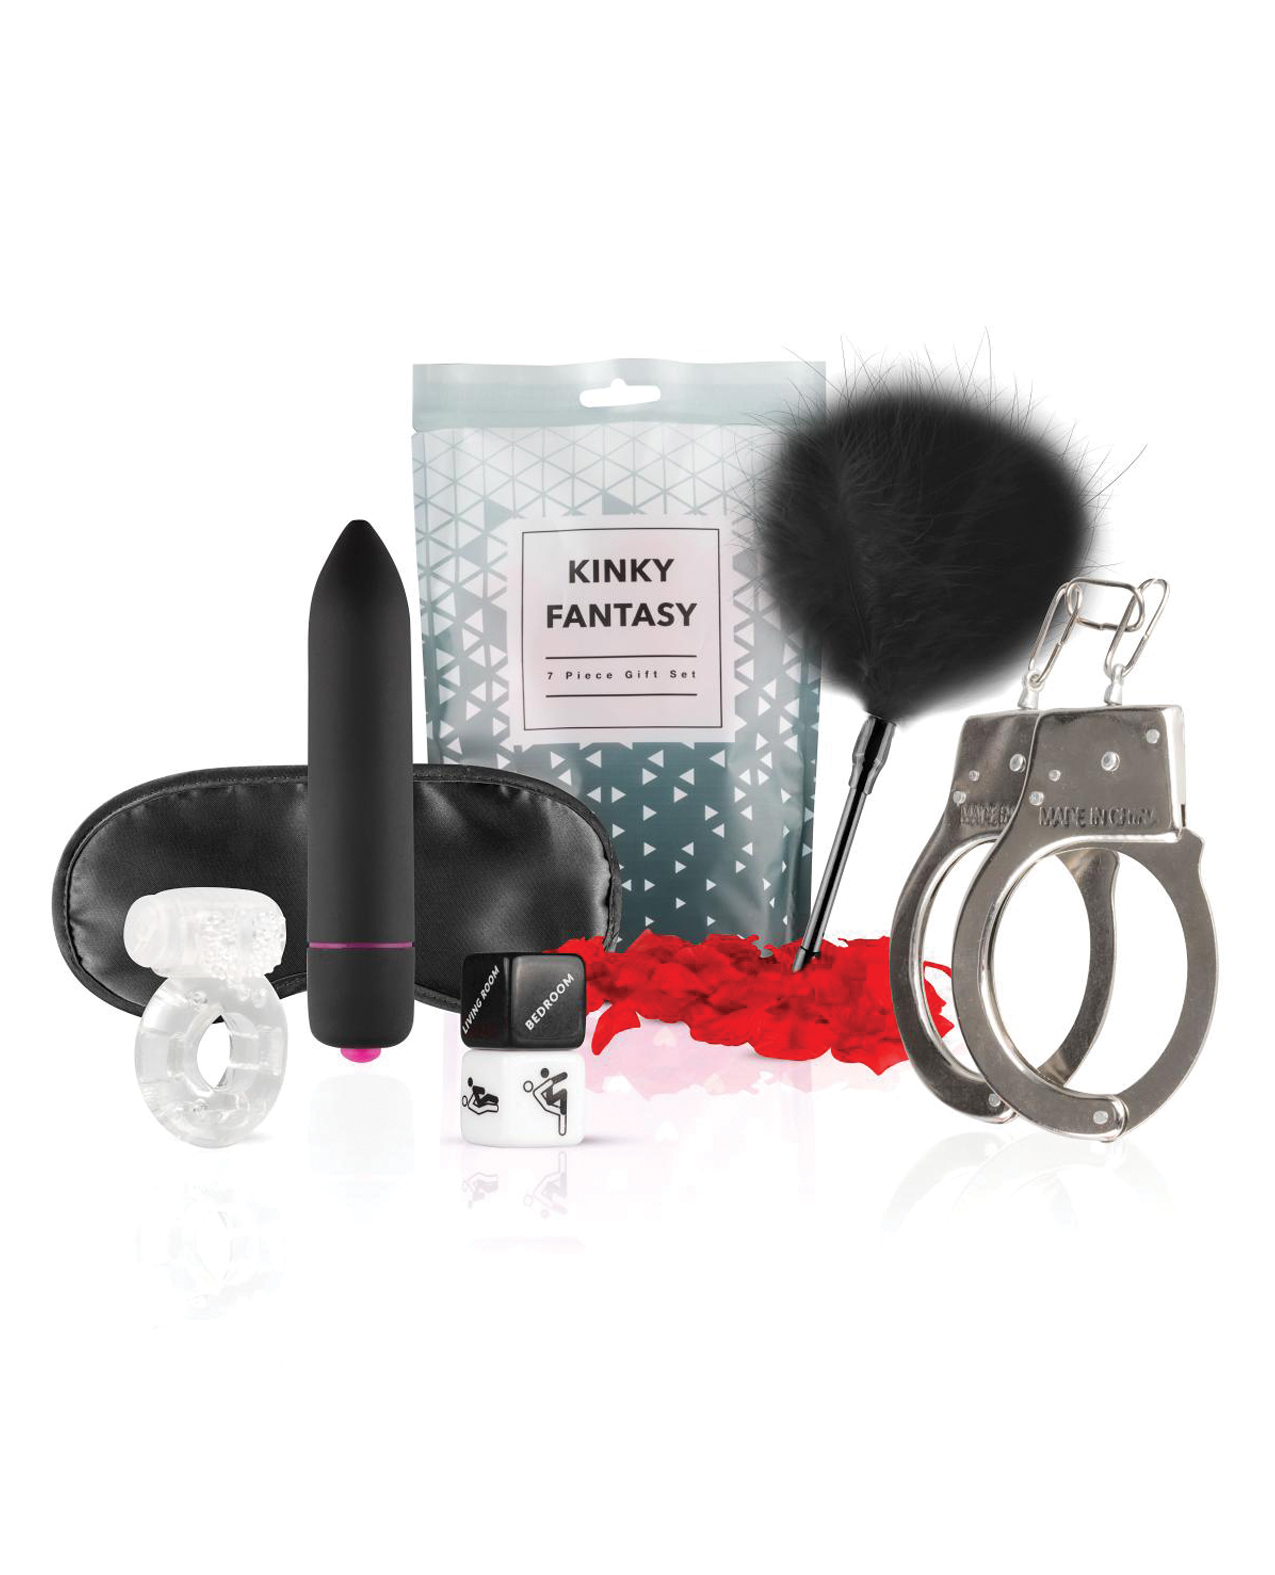 A couples kit in a bag with Rose petals, Mask, Bullet vibrator, Tickler, Hand cuffs, Vibrating, cock ring, Sex dice